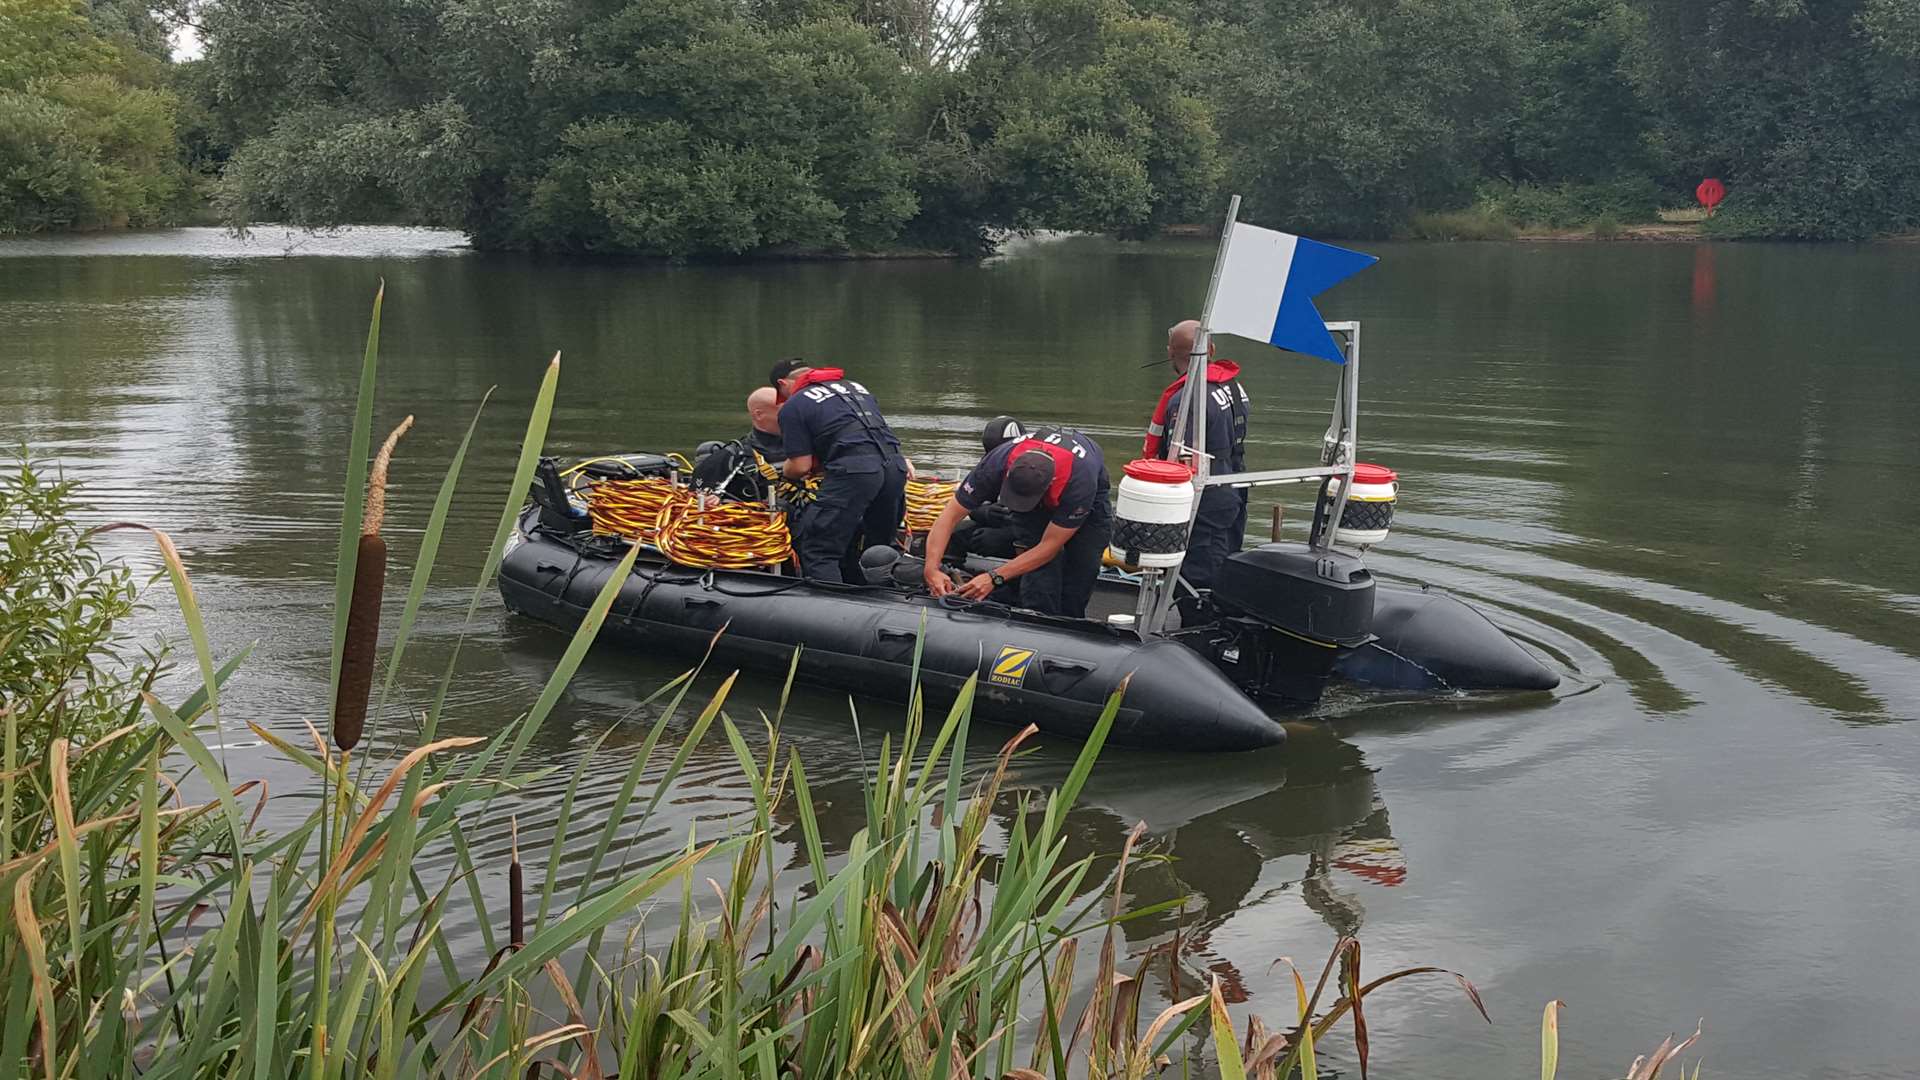 Police divers spotted in Singleton